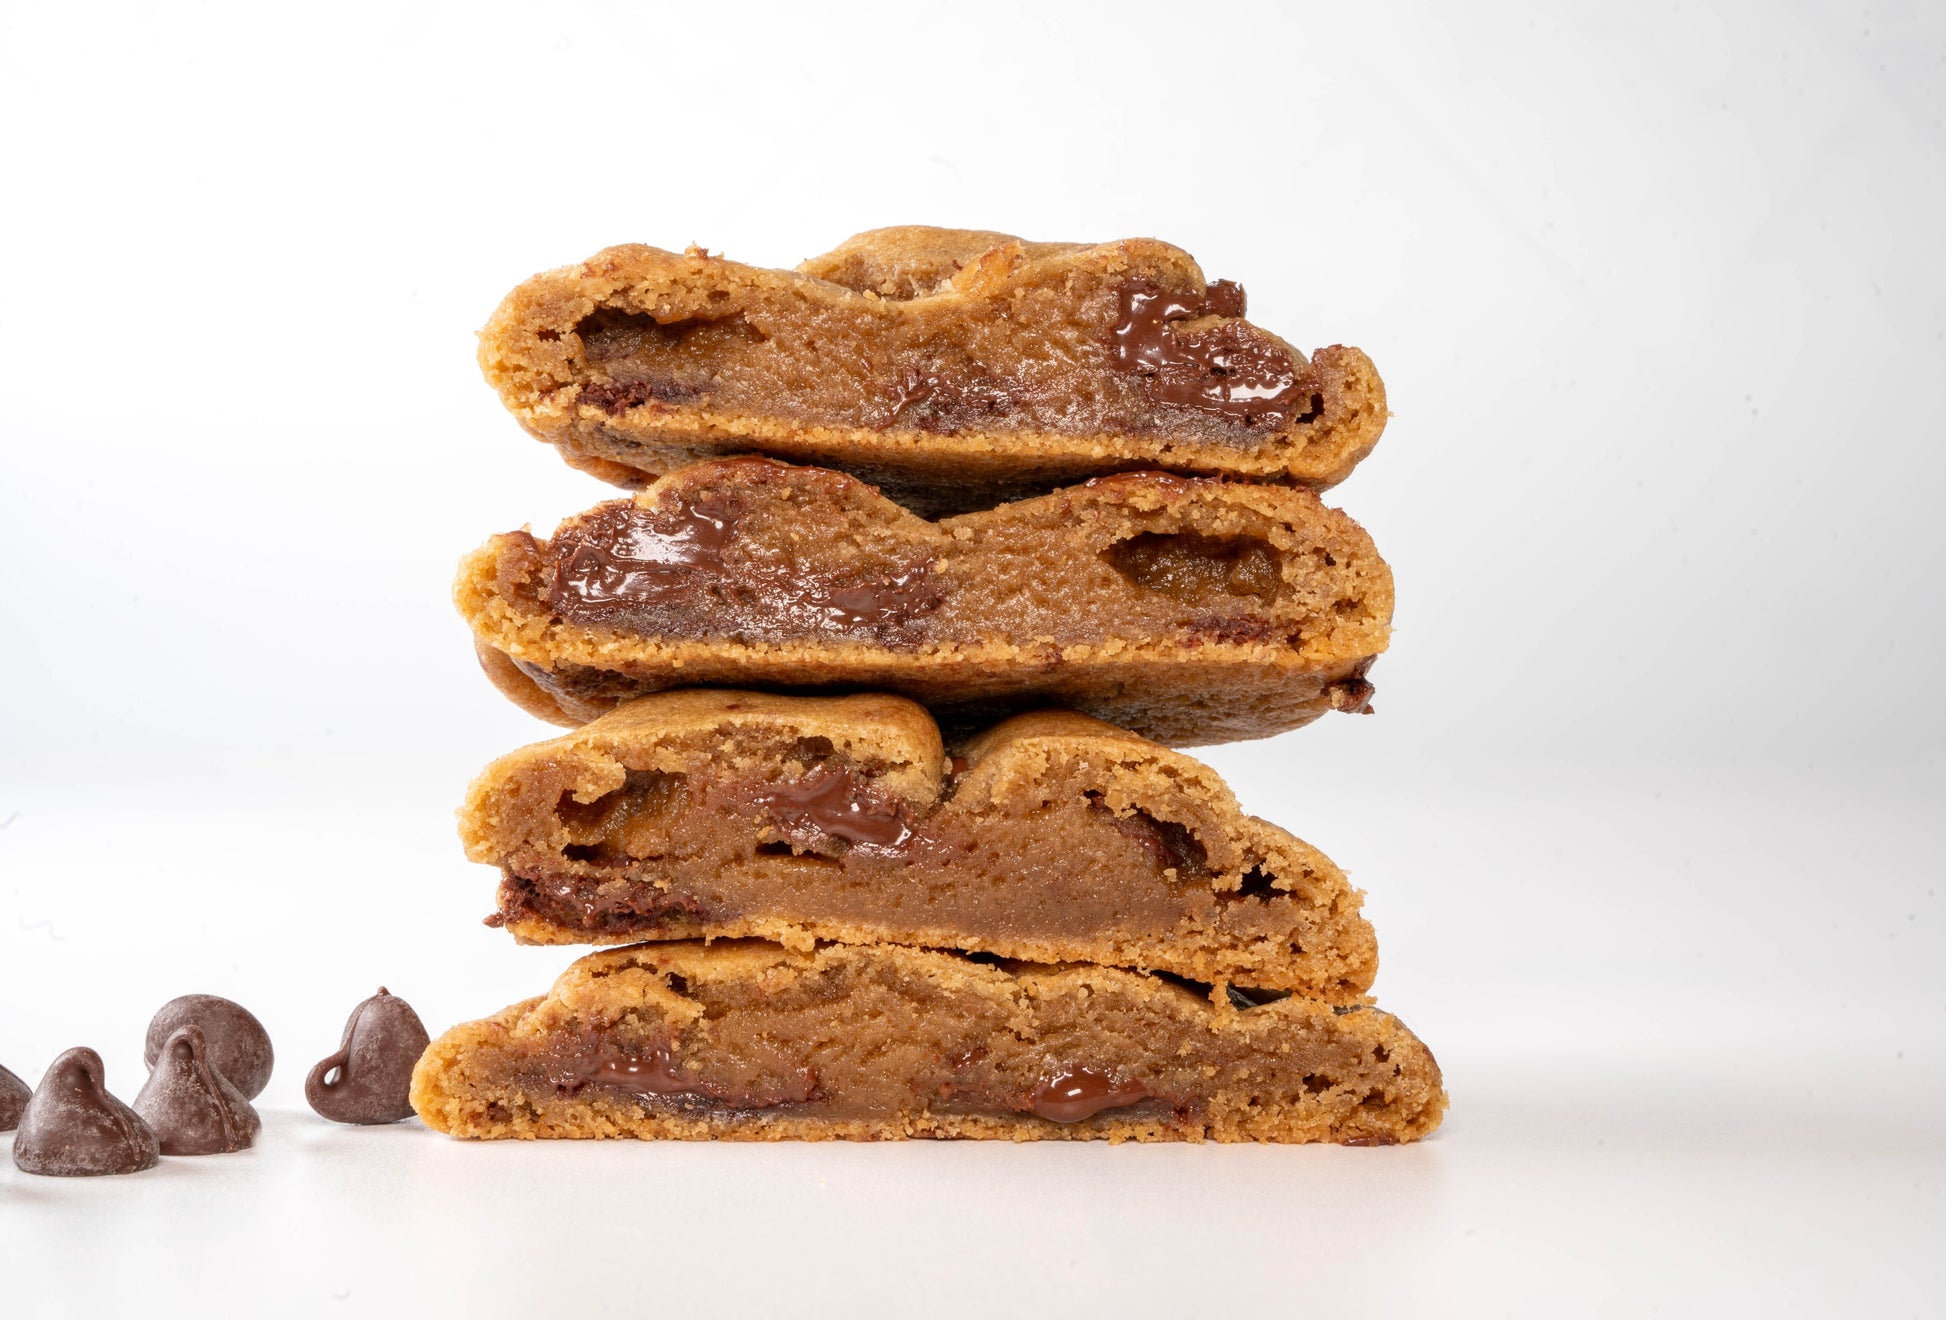 The Original Chocolate Chip Cookies – Chocolate and the Chip